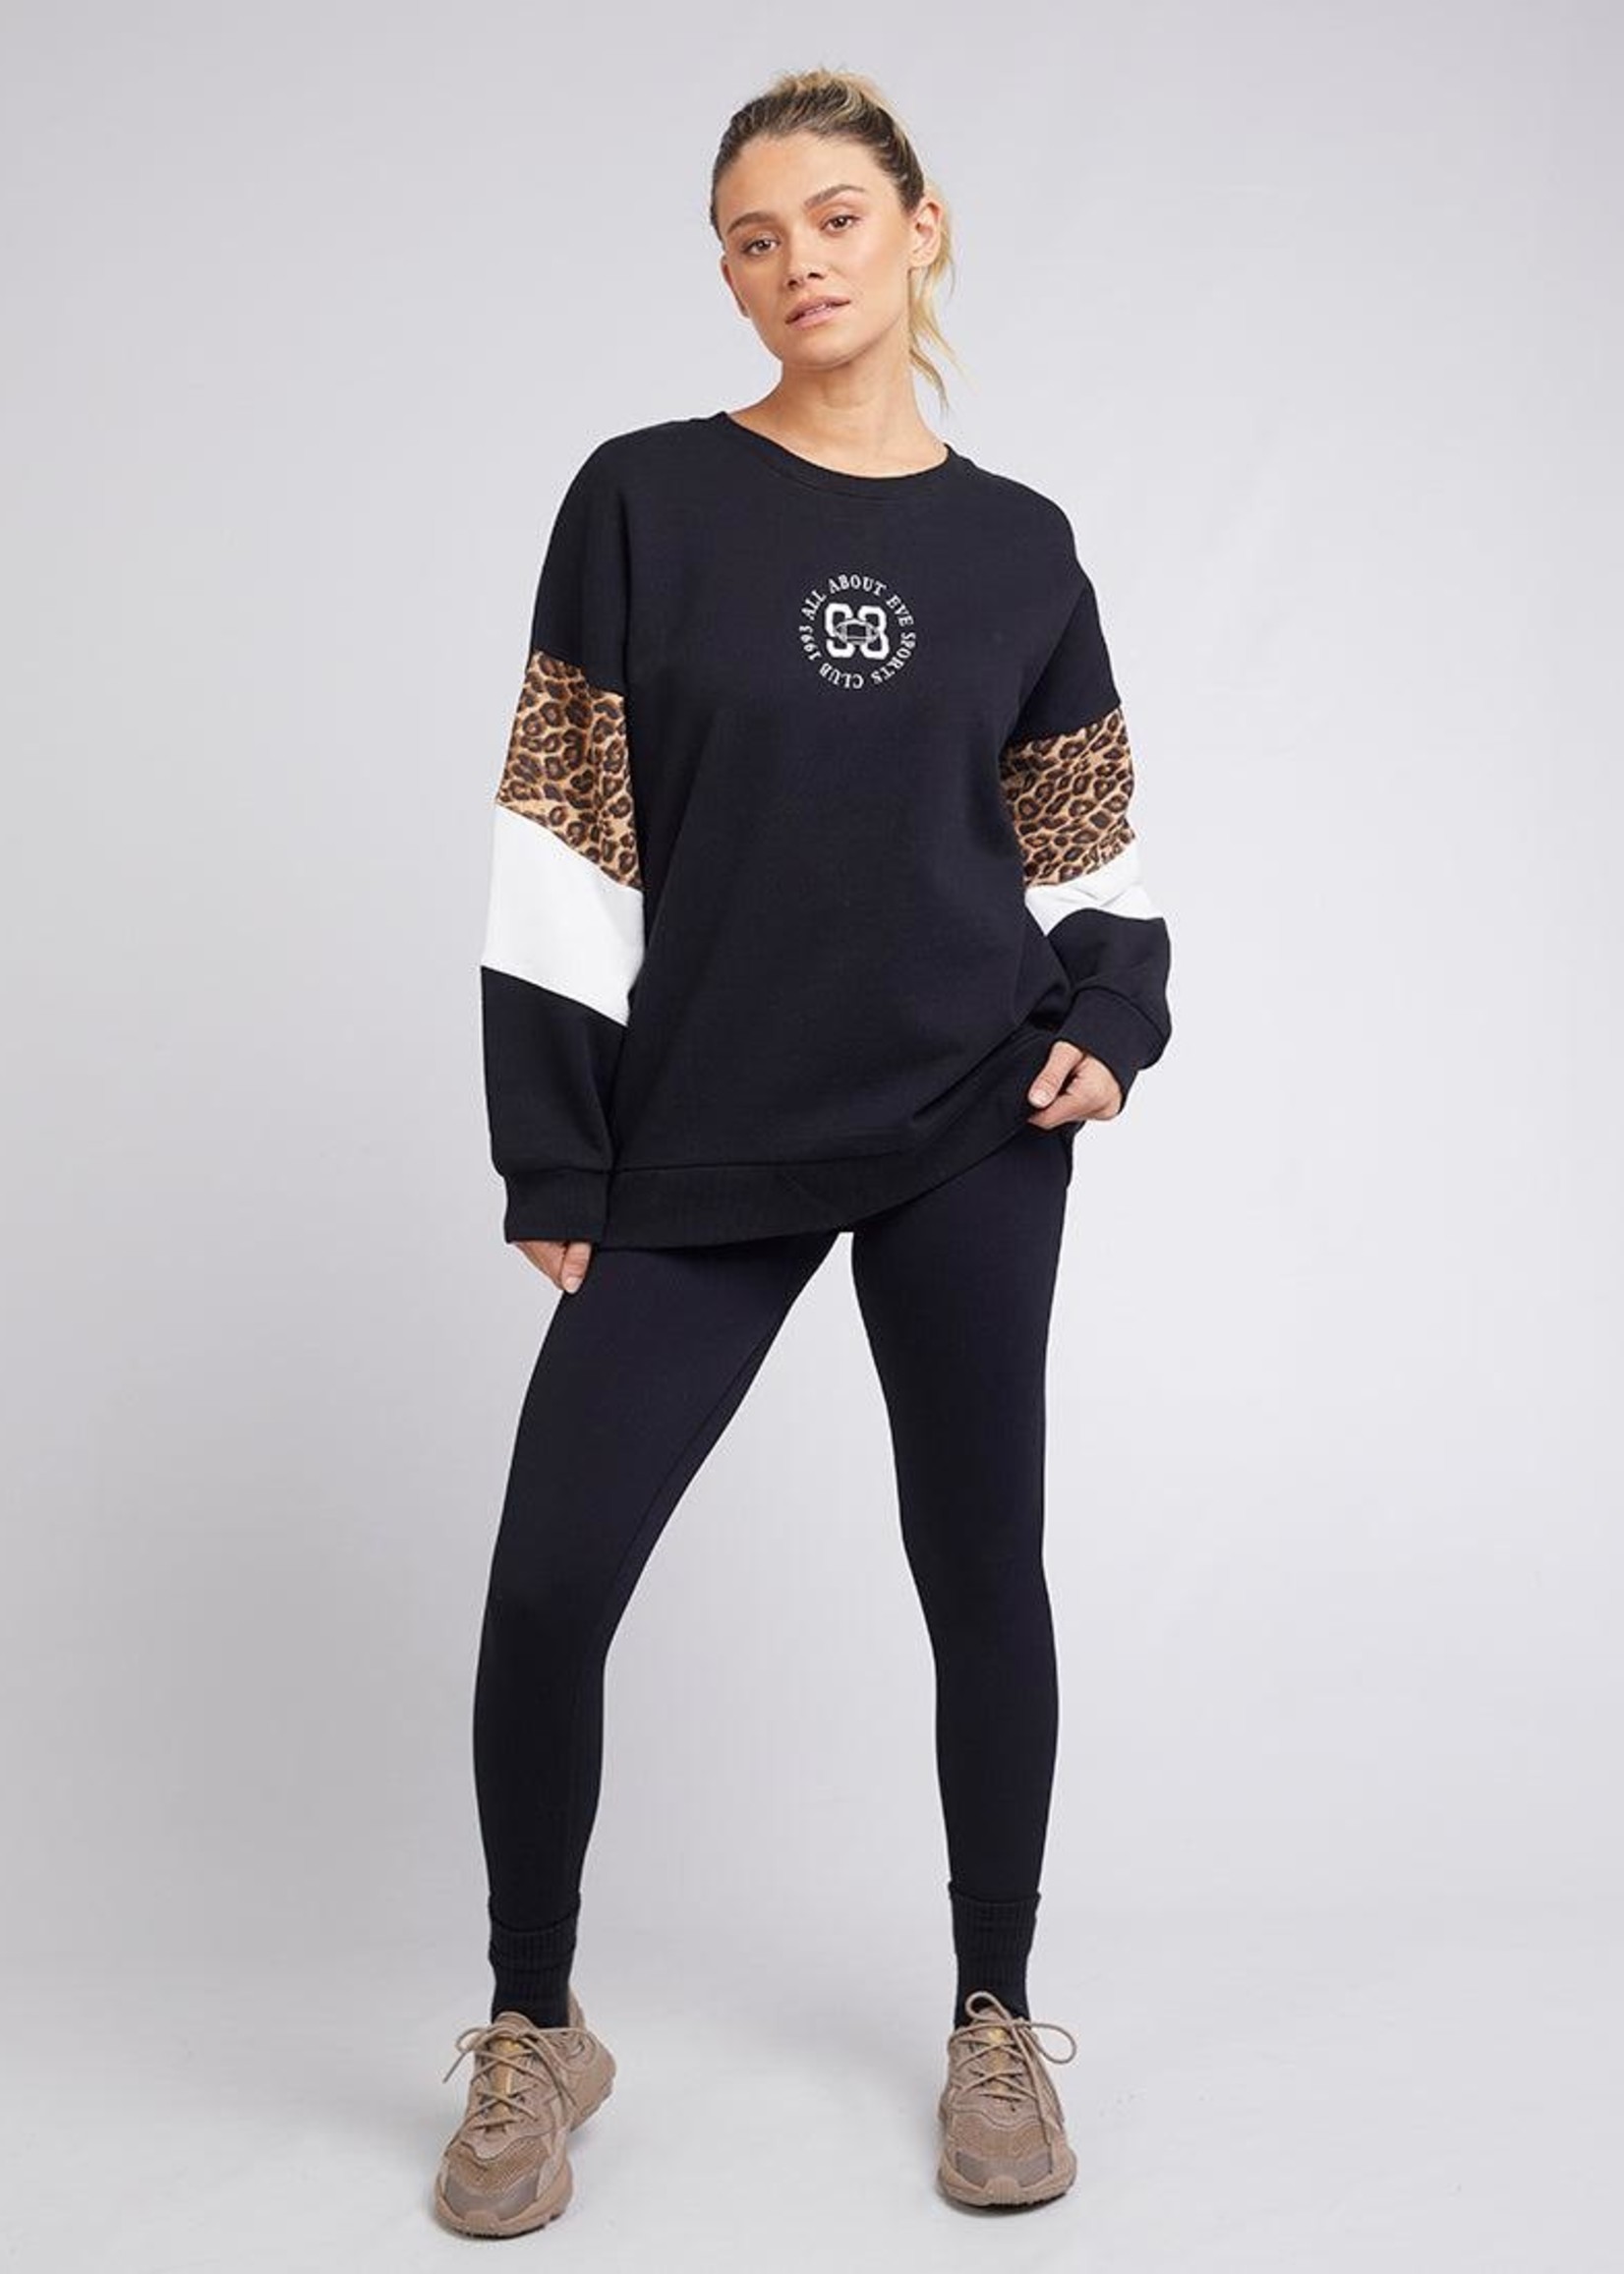 All About Eve Carter Leopard Panelled Crew